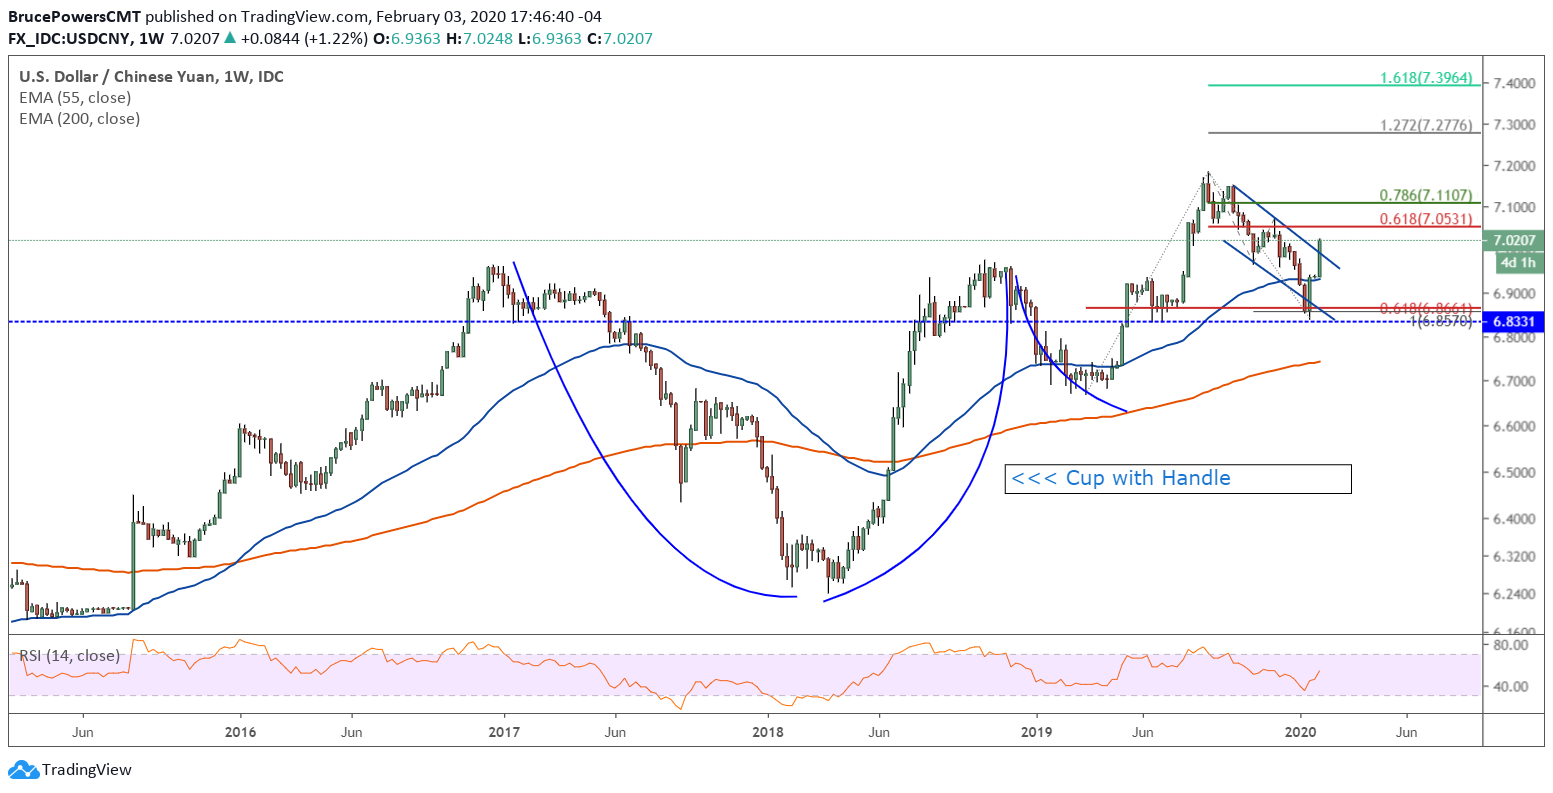 USD/CNY Weekly Chart - Cup w/Handle